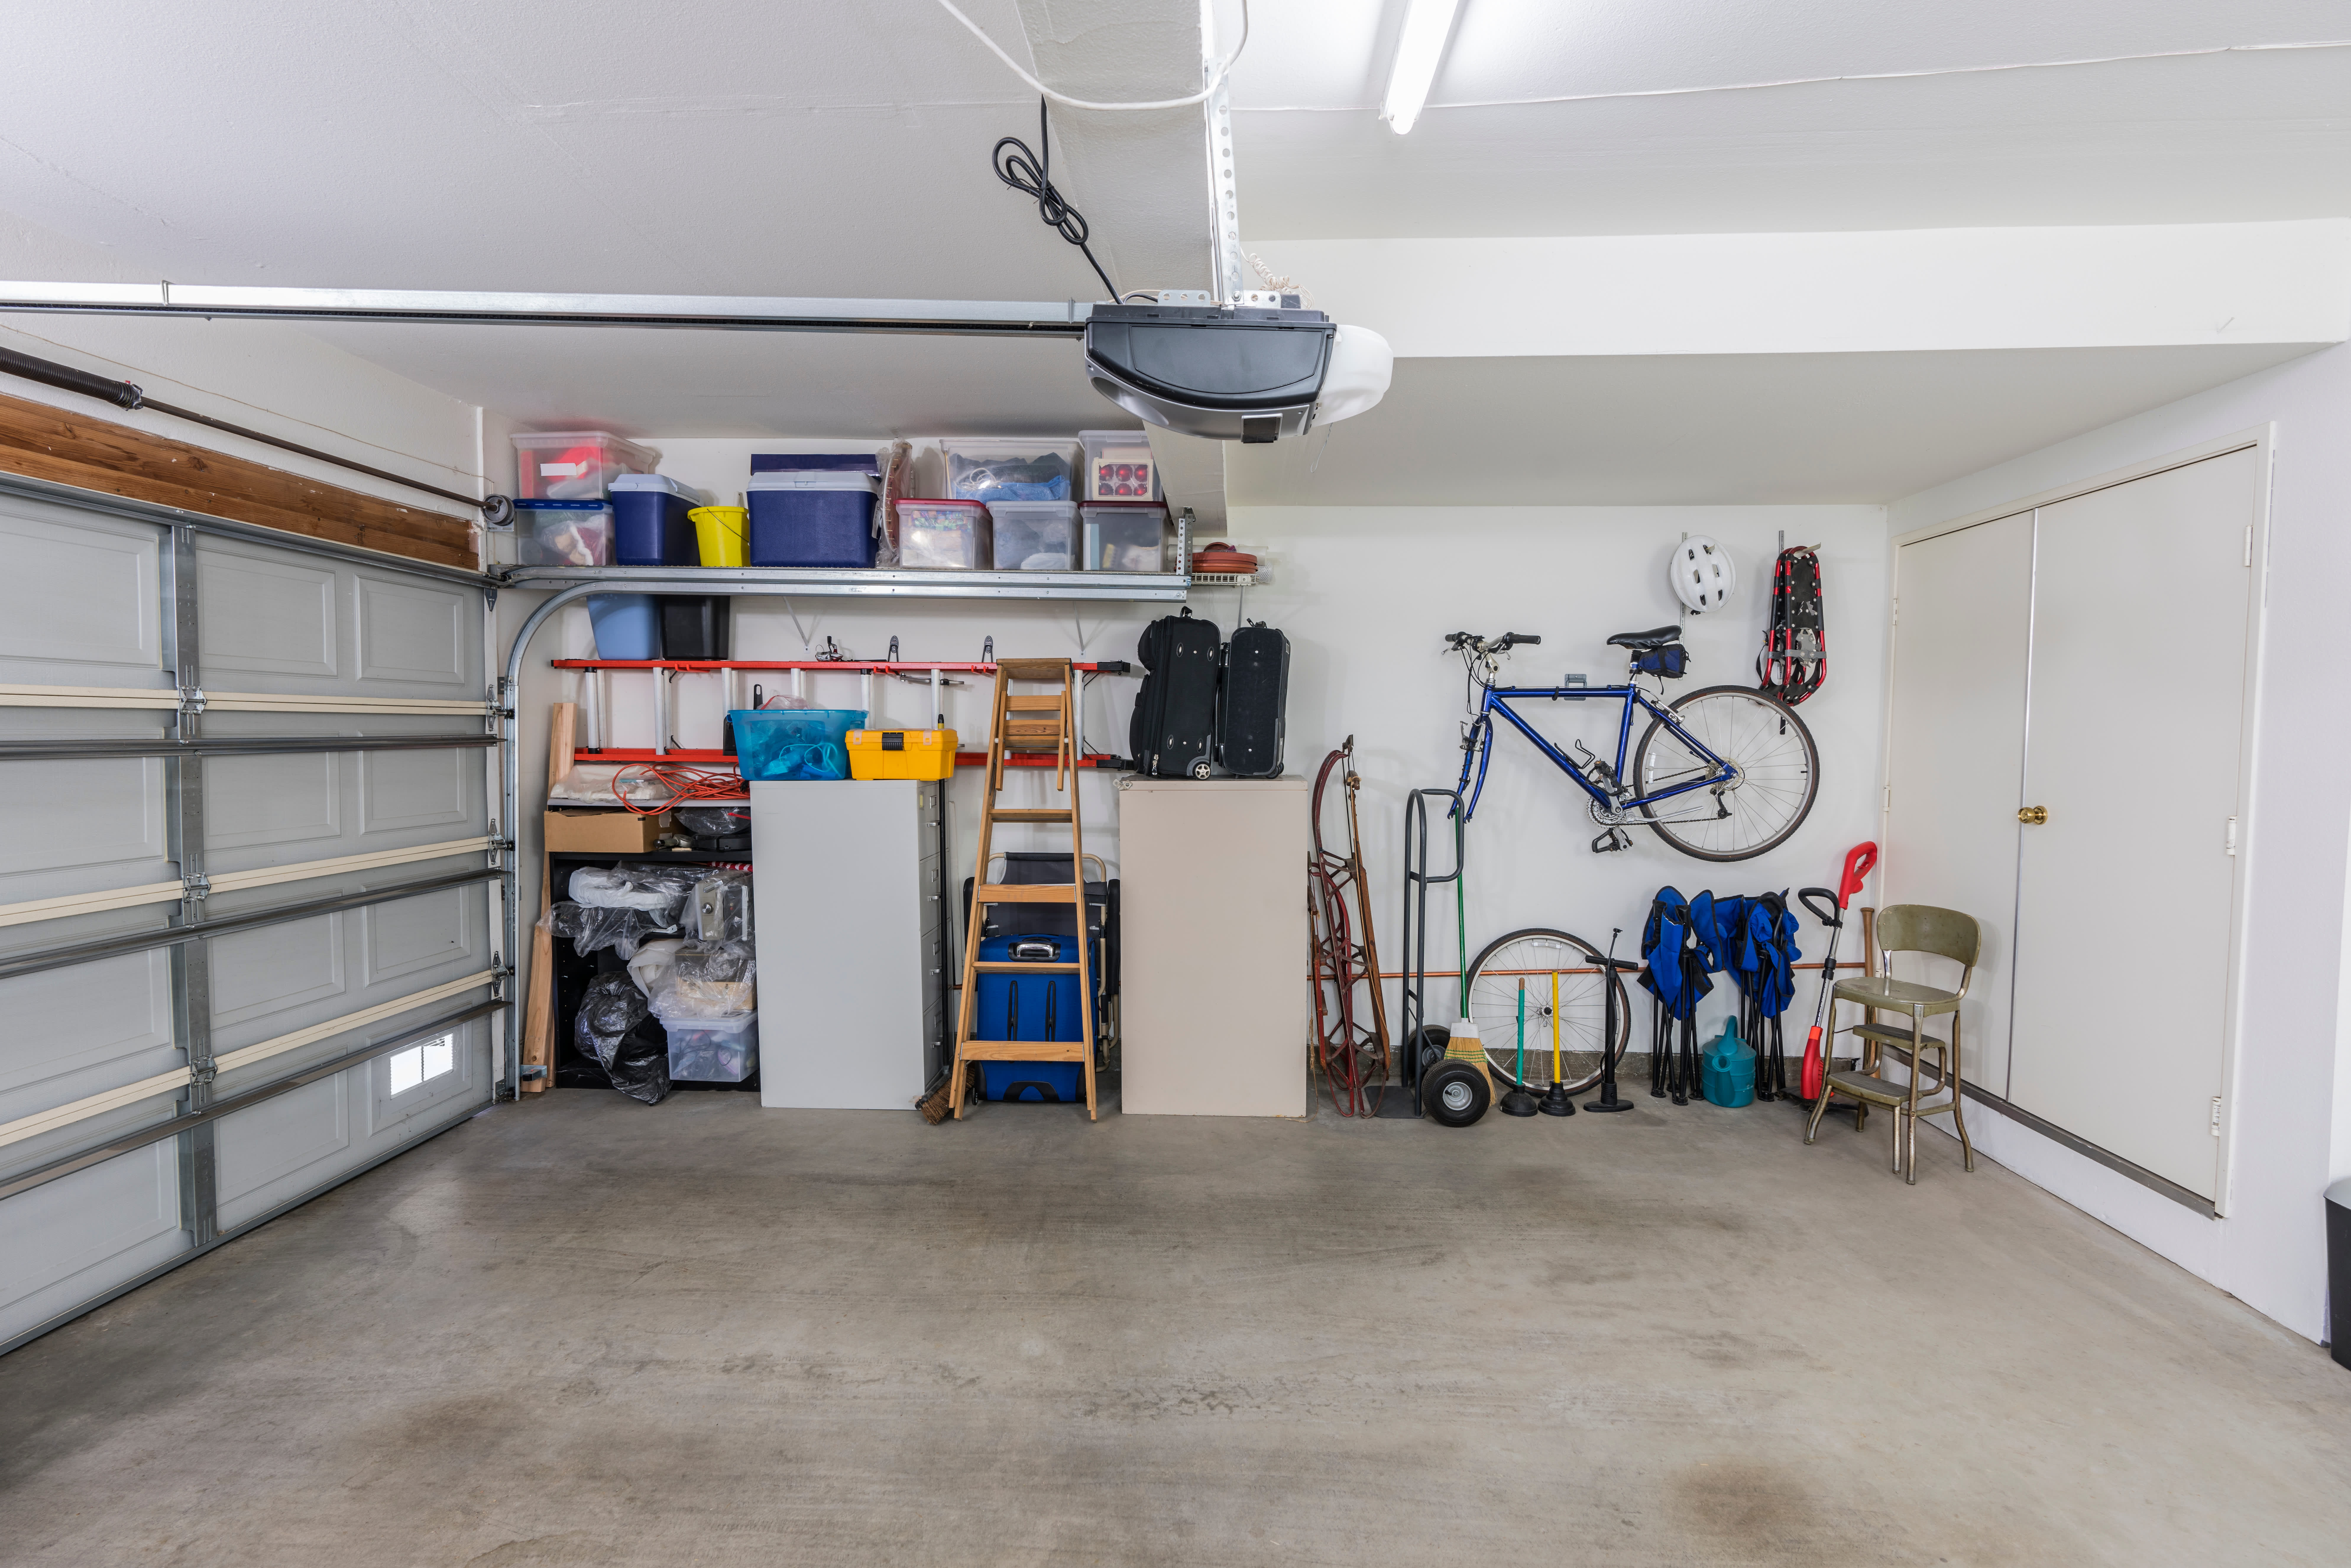 378-Square-Foot Tiny House Used to Be a Garage